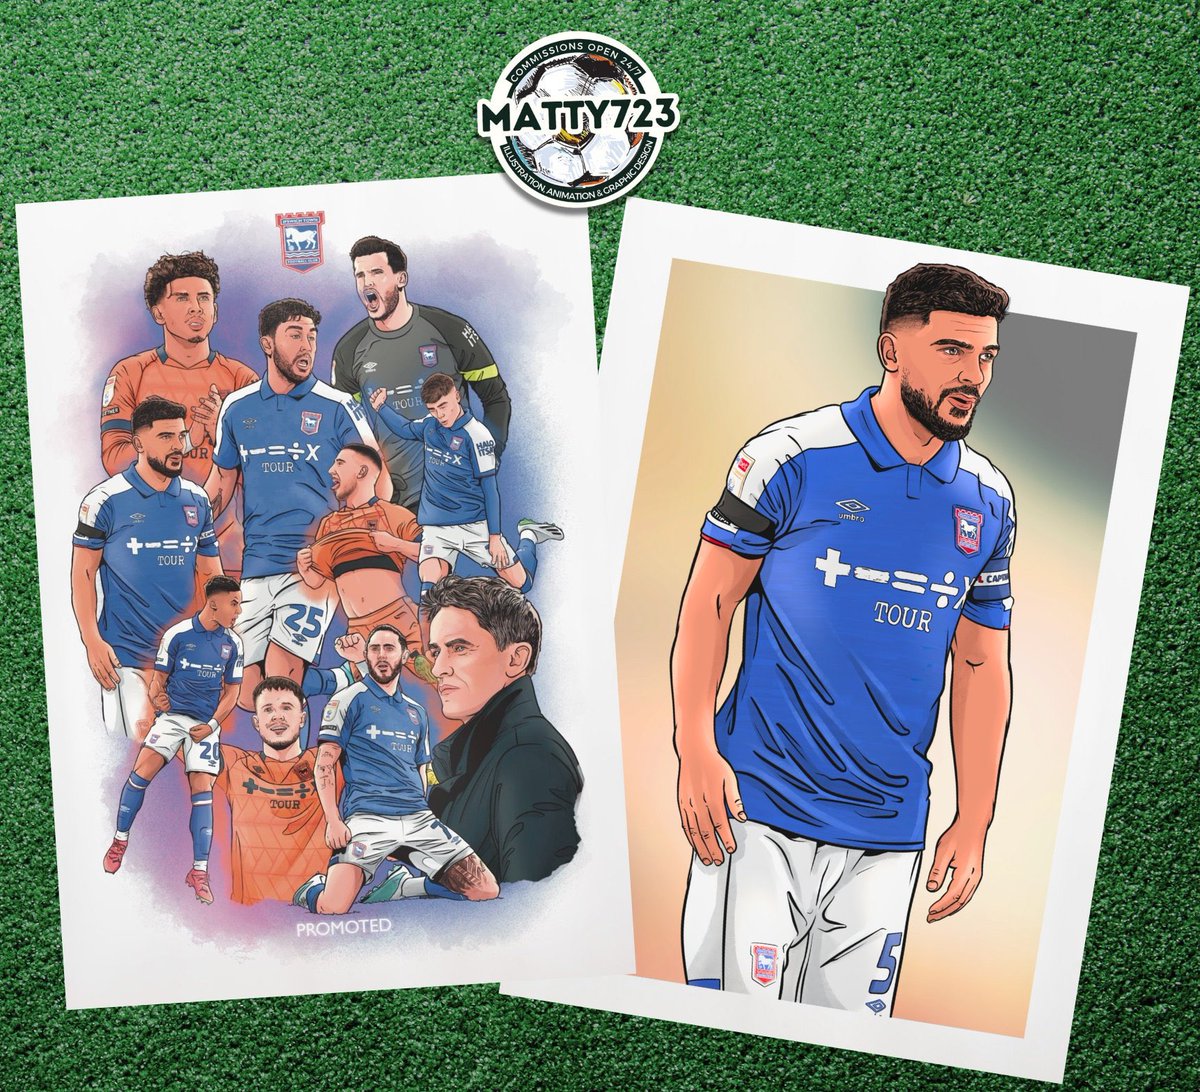 Happy Friday 🍻 Today we've teamed up with @_Matty723 for a special giveaway To win an A4 copy of both these prints simply; 1️⃣ Repost 🔁 2️⃣ Follow us both 3️⃣ Tag a mate Winner announced at 7pm on Sunday, good luck! #ITFC